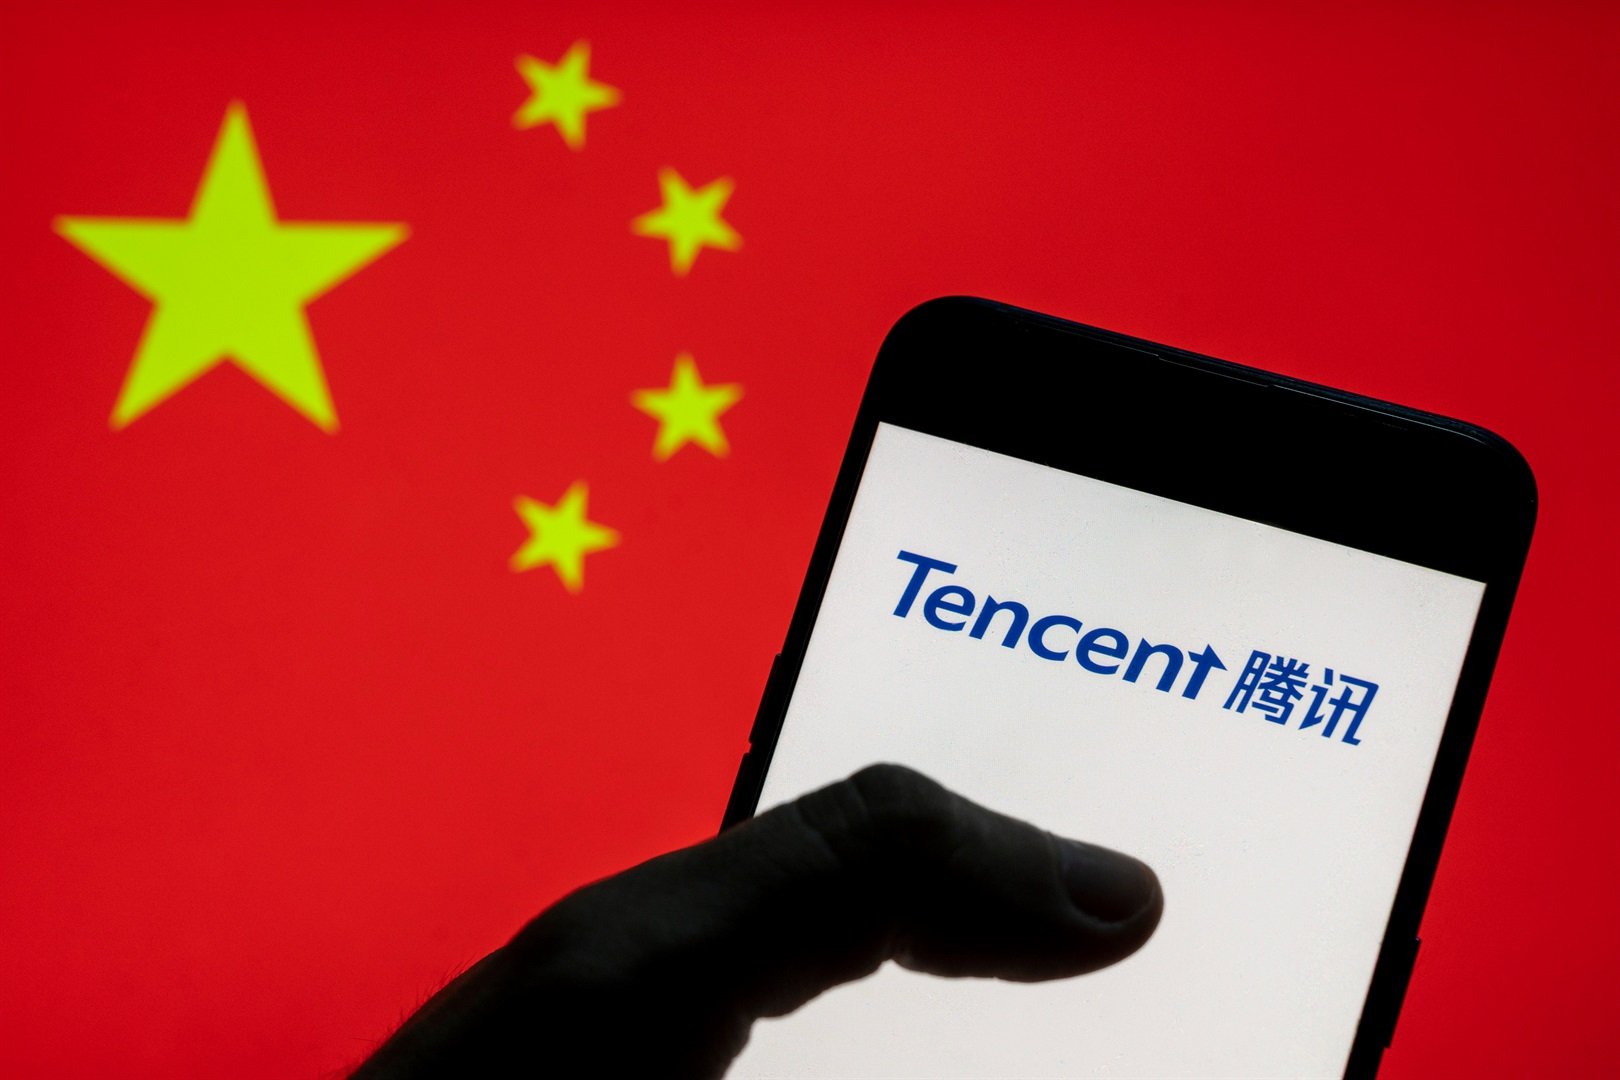 Tencent shares jump as TikTok style service gains traction